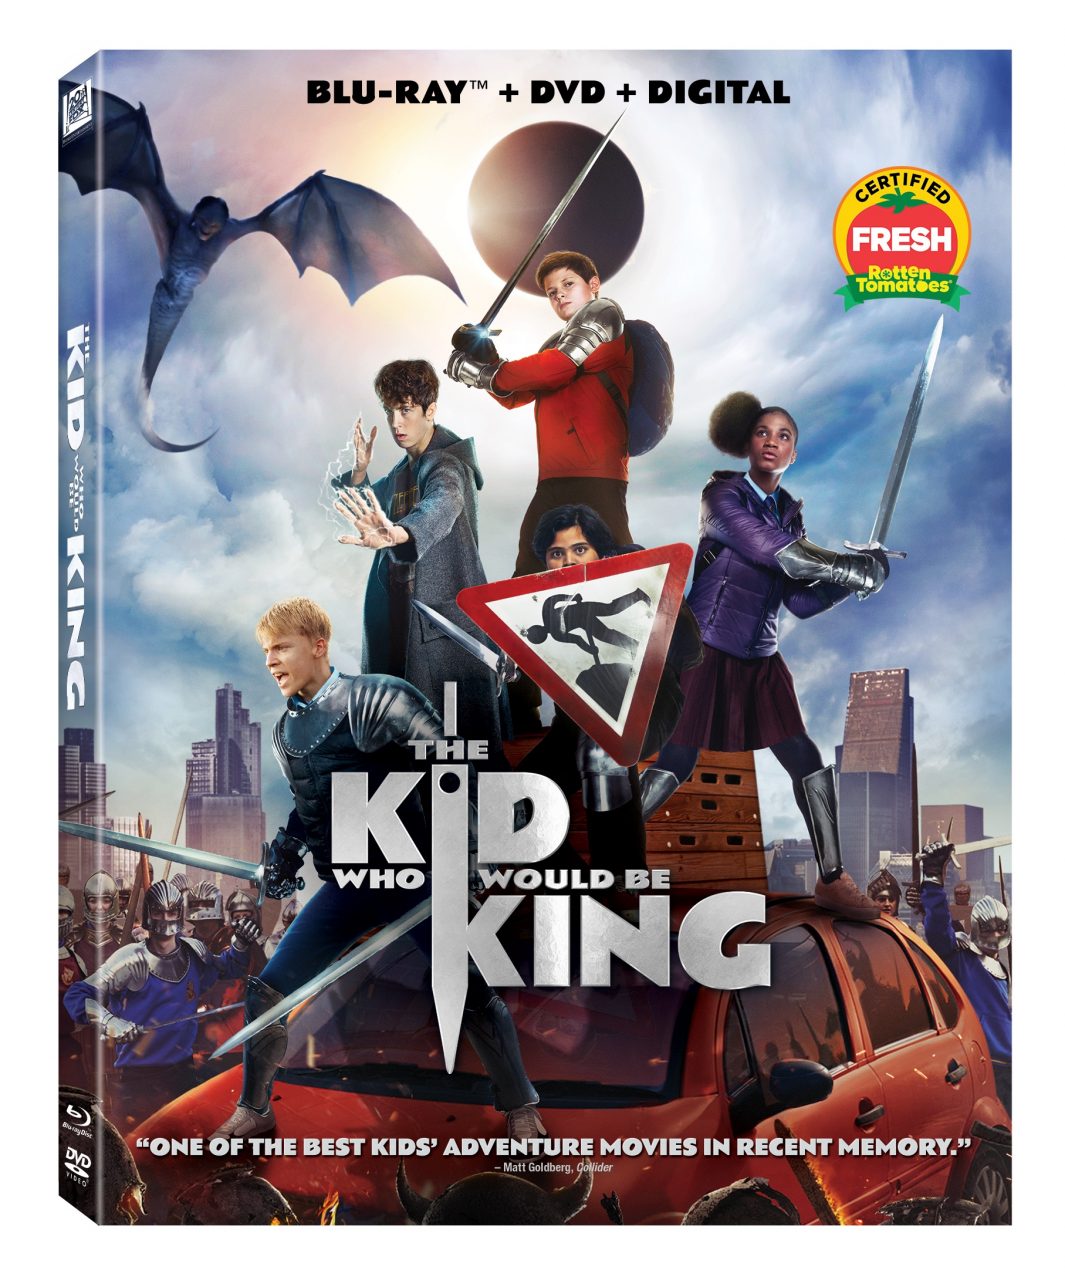 The Kid Who Would Be King Blu-Ray Combo Pack cover (20th Century Fox Home Entertainment)